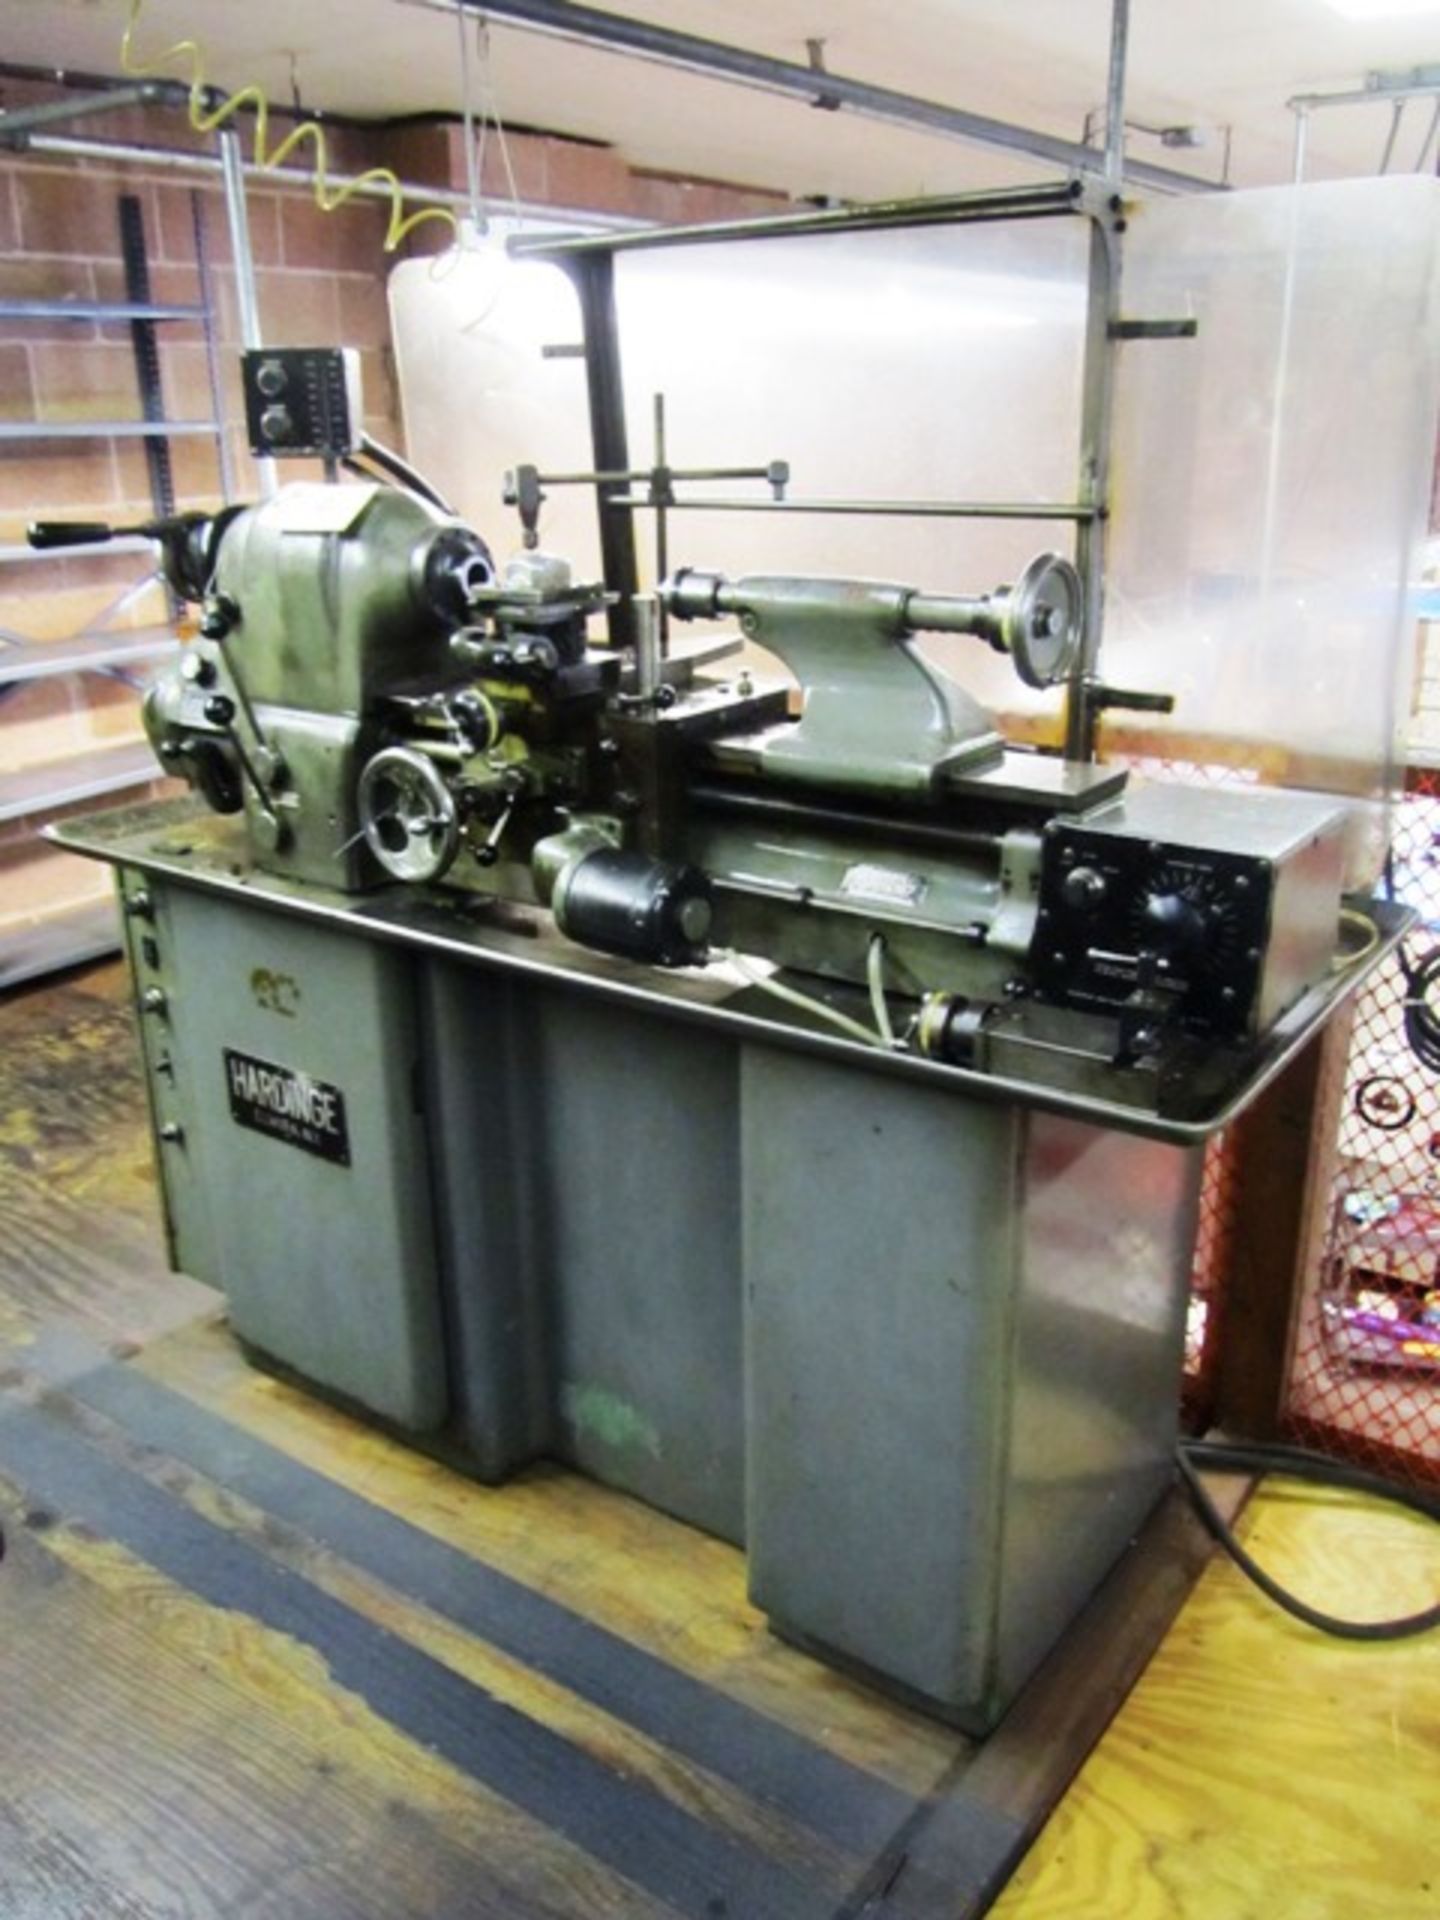 Hardinge Dovetail Bed HLV Approx 12'' x 18'' Toolroom Lathe